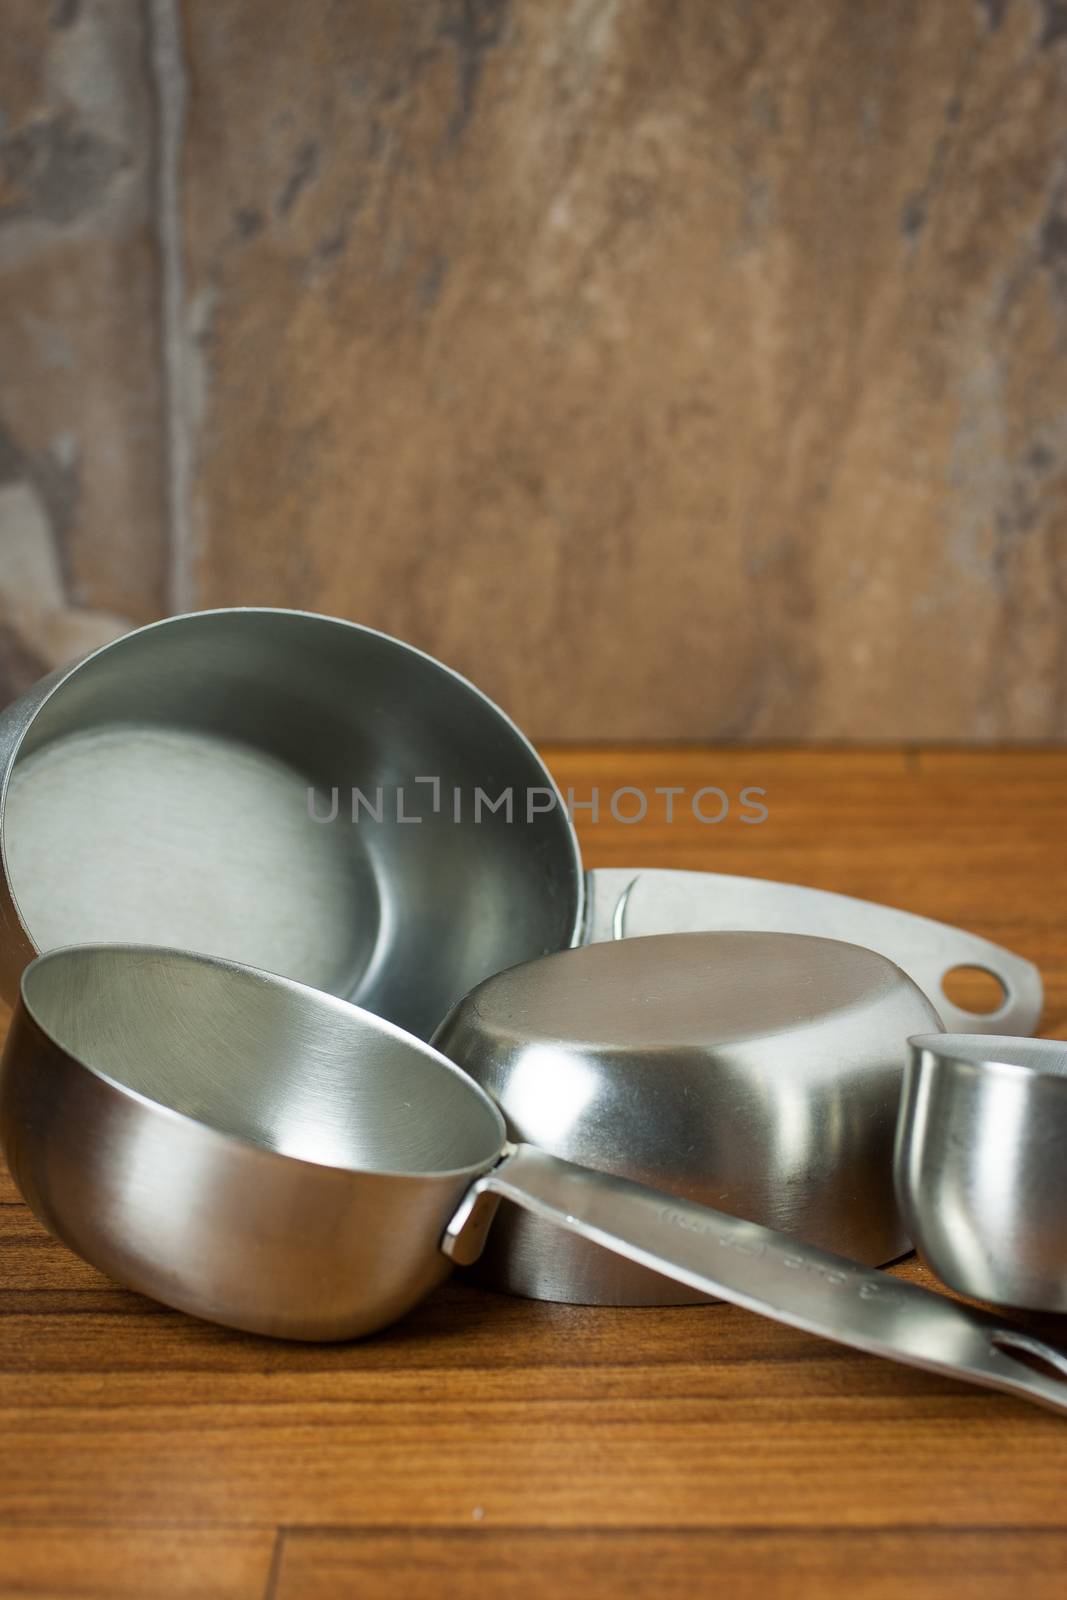 Aluminum measuring spoons sitting on a wooden surface.